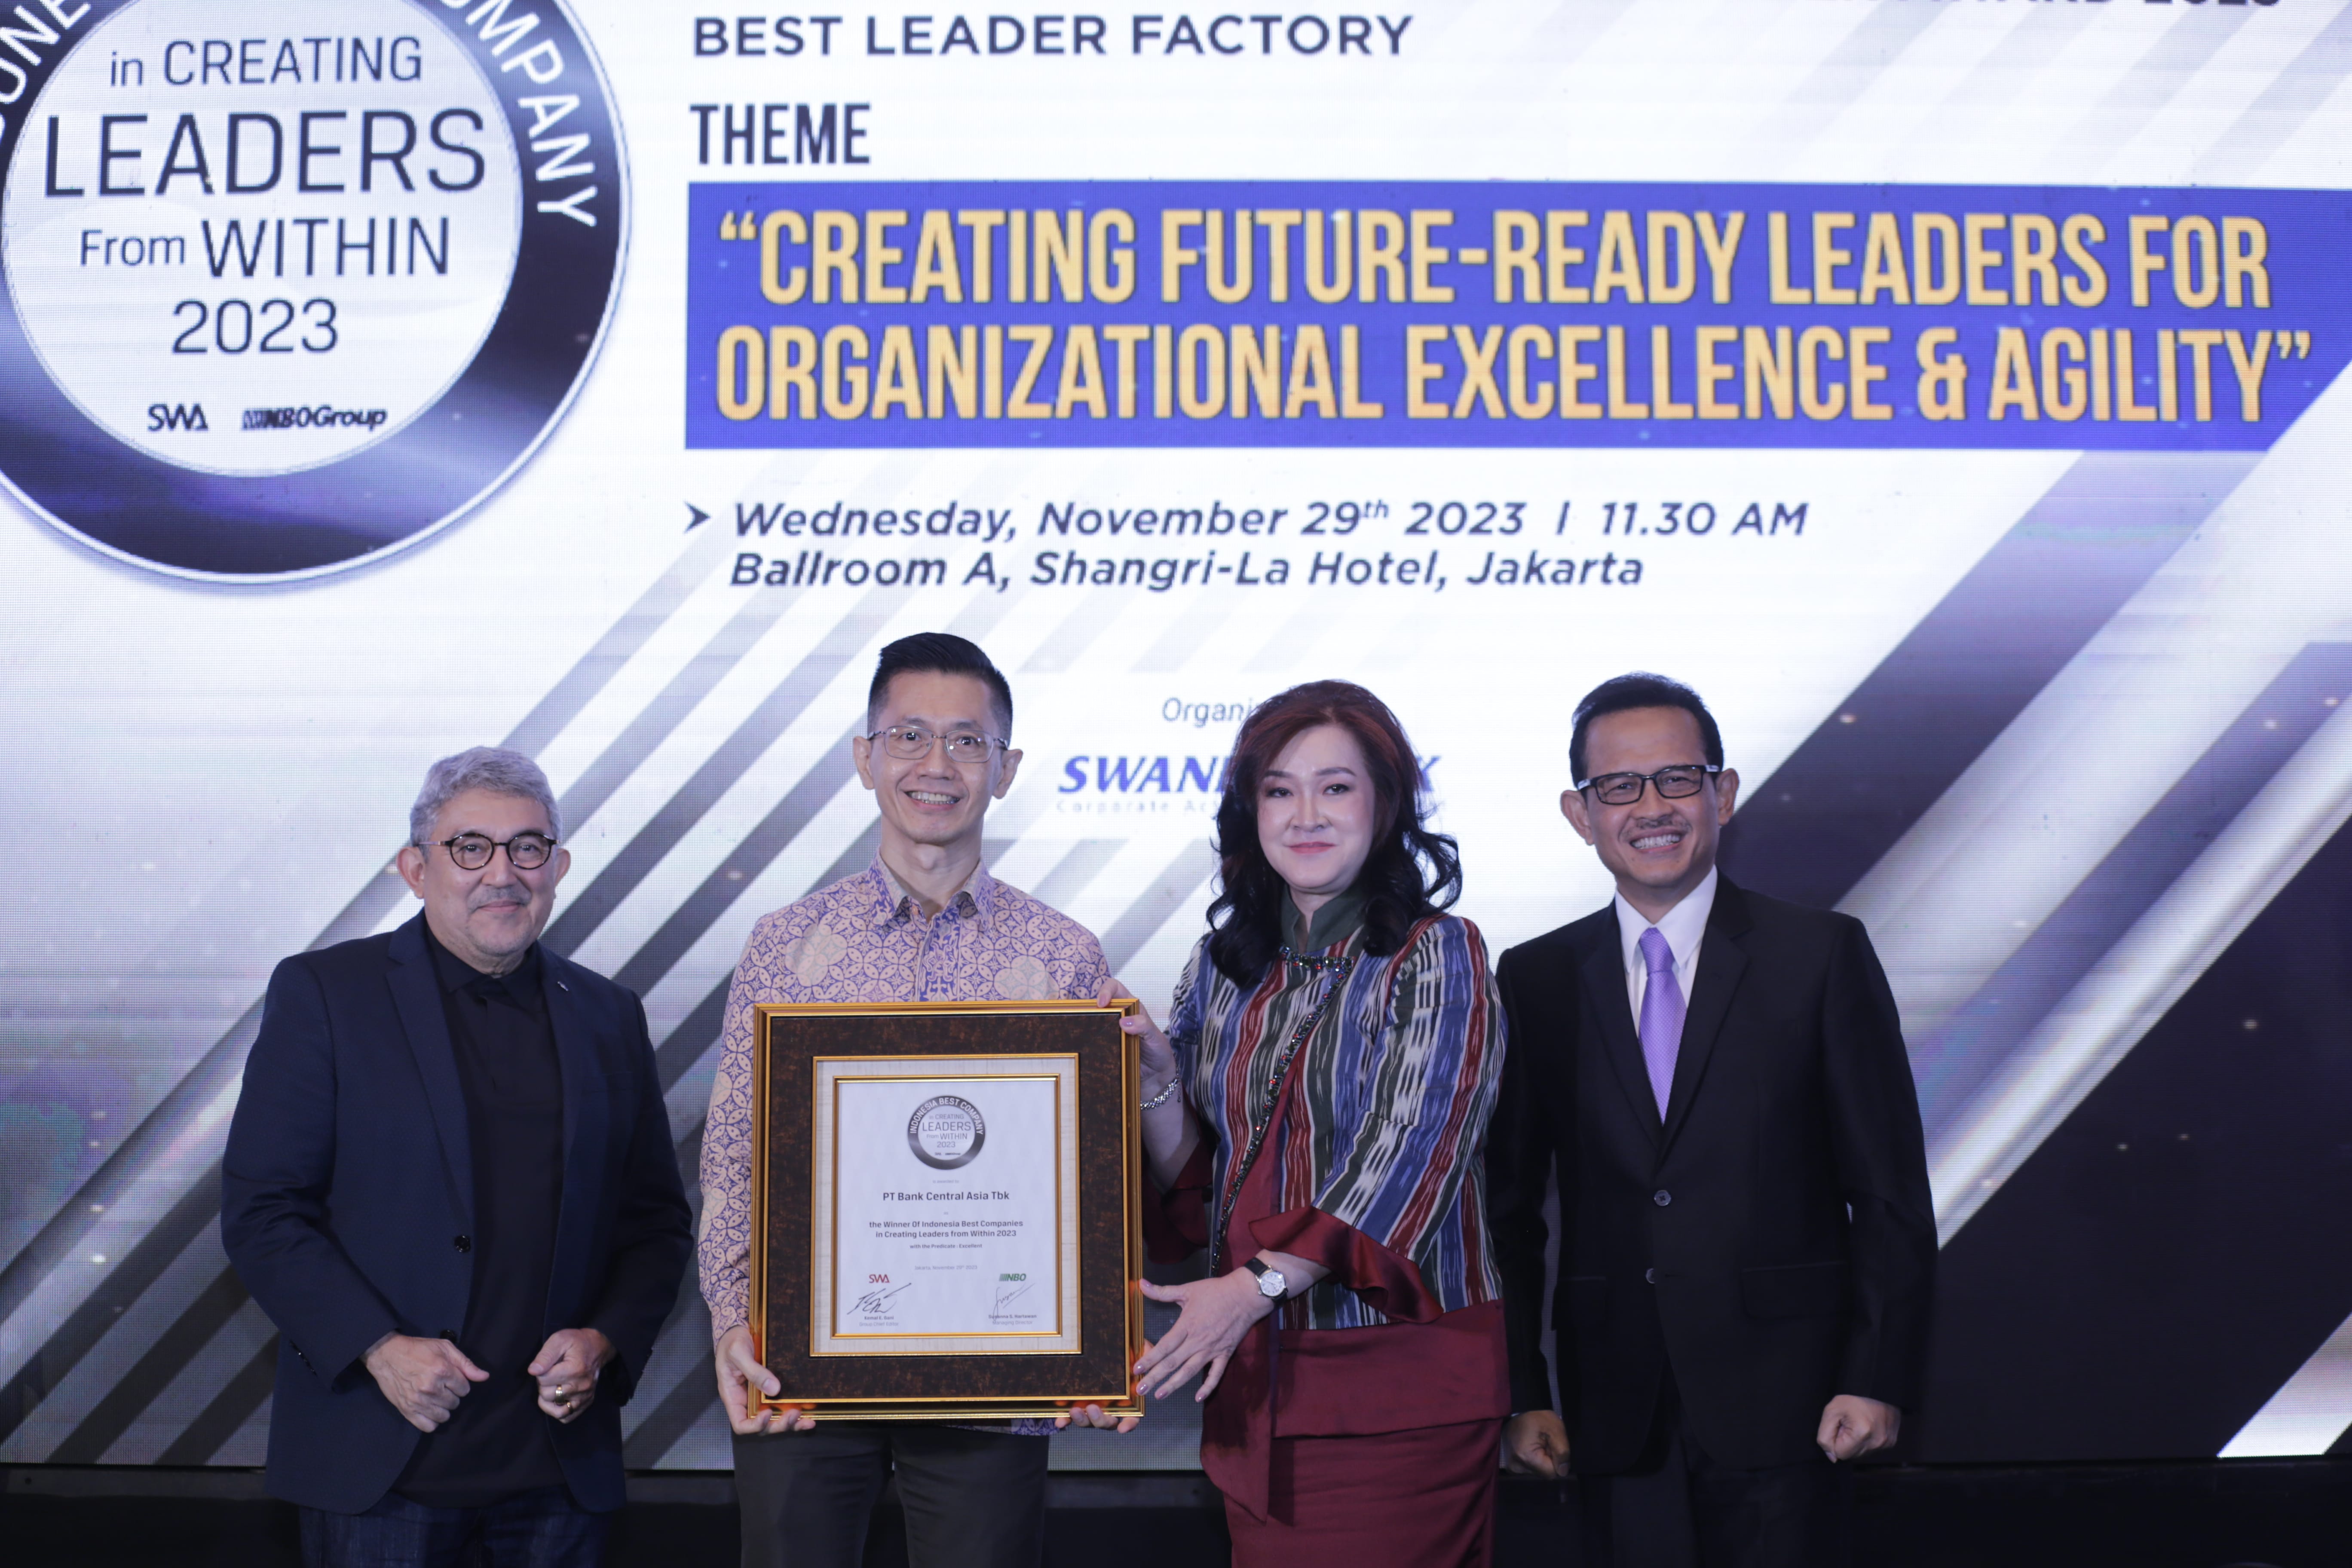 PRESTASI! BCA Raih Indonesia Best Company in Creating Leaders from Within 2023